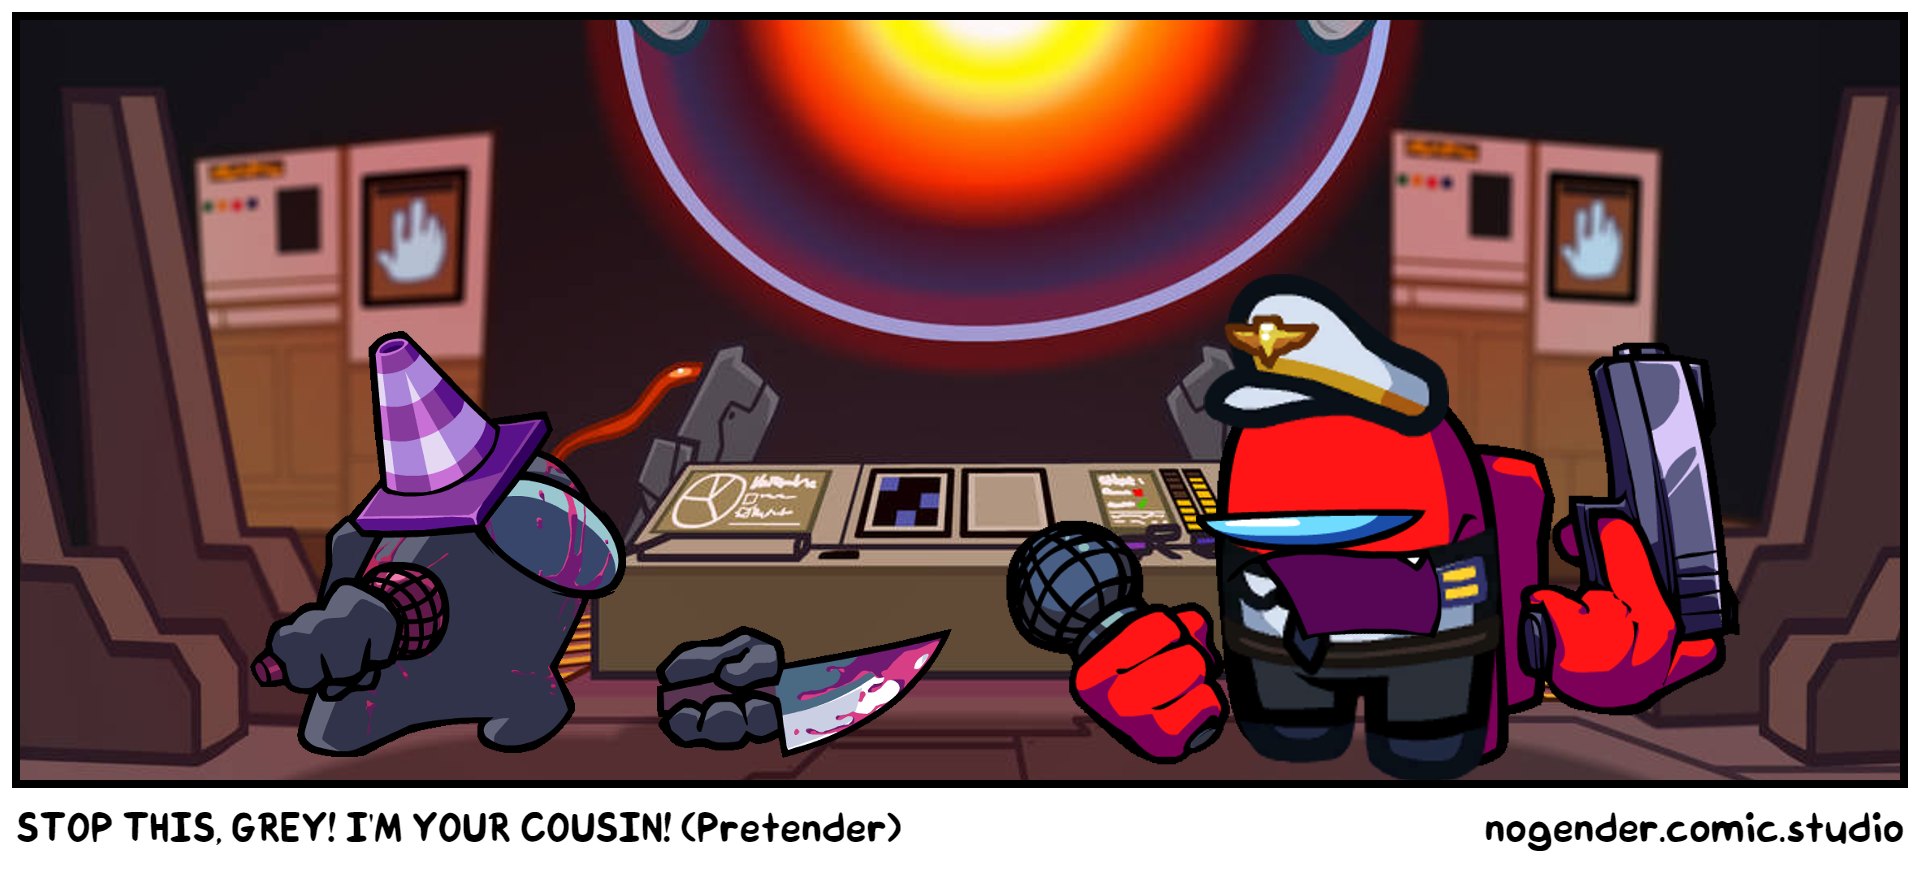 STOP THIS, GREY! I'M YOUR COUSIN! (Pretender)